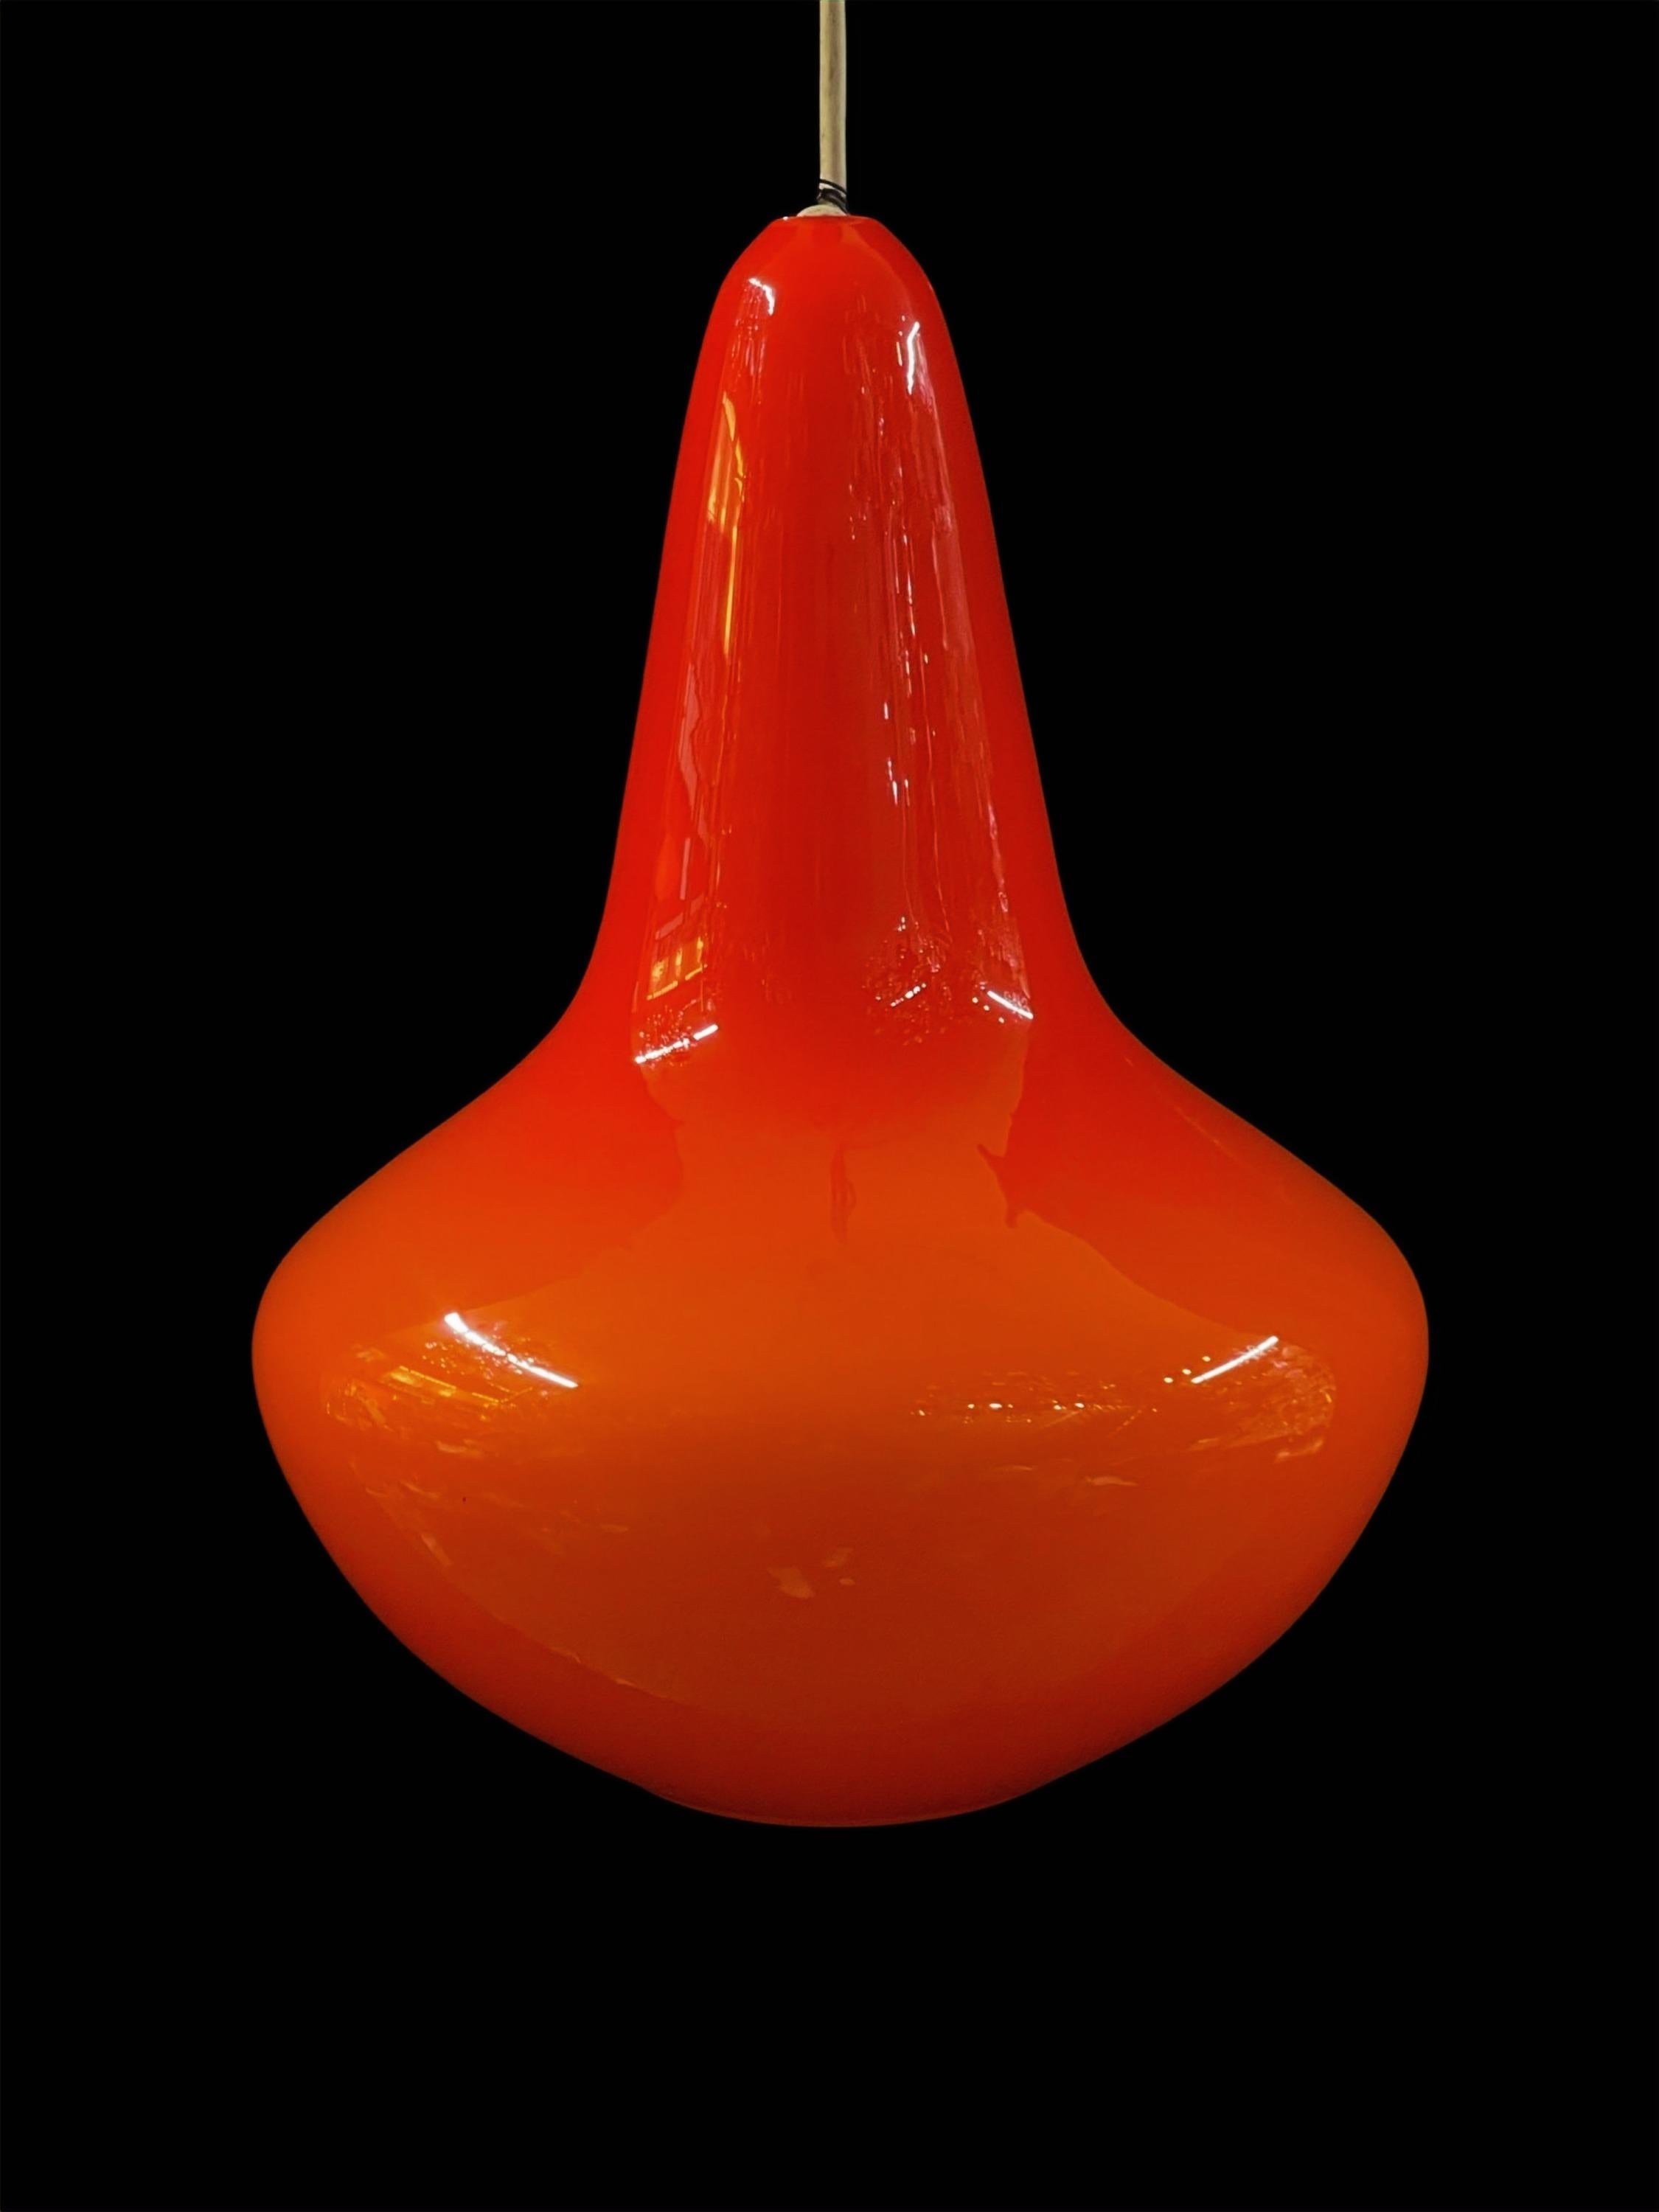 Introducing our stunning Vintage Bold Orange Glass Pendant Light, a timeless piece reminiscent of the vibrant 1970s era.

Radiating a rich, luminous orange hue, this pendant light is not only in impeccable condition but also serves as a captivating